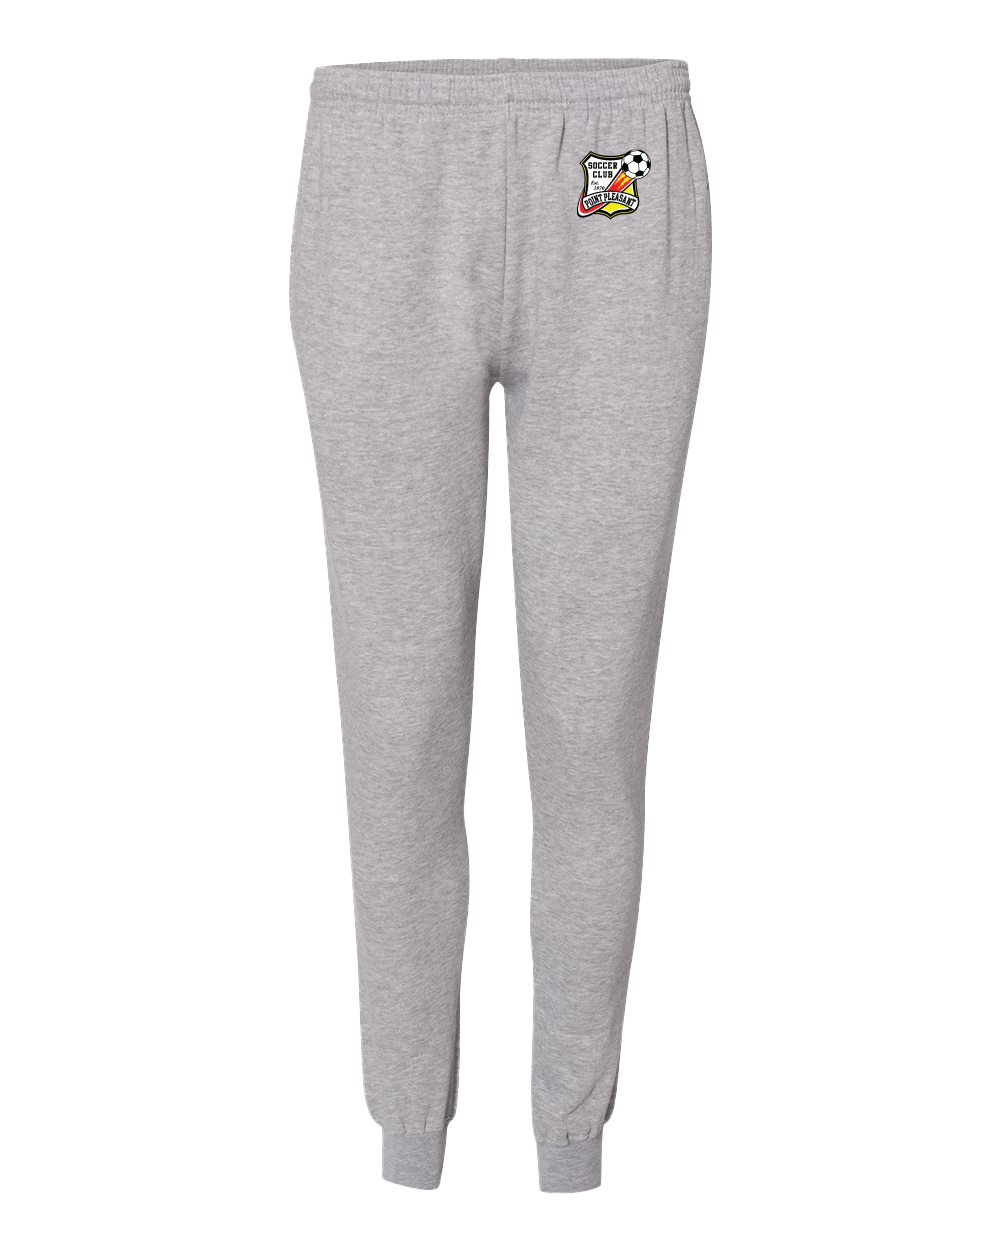 PPSC Badger Athletic Joggers